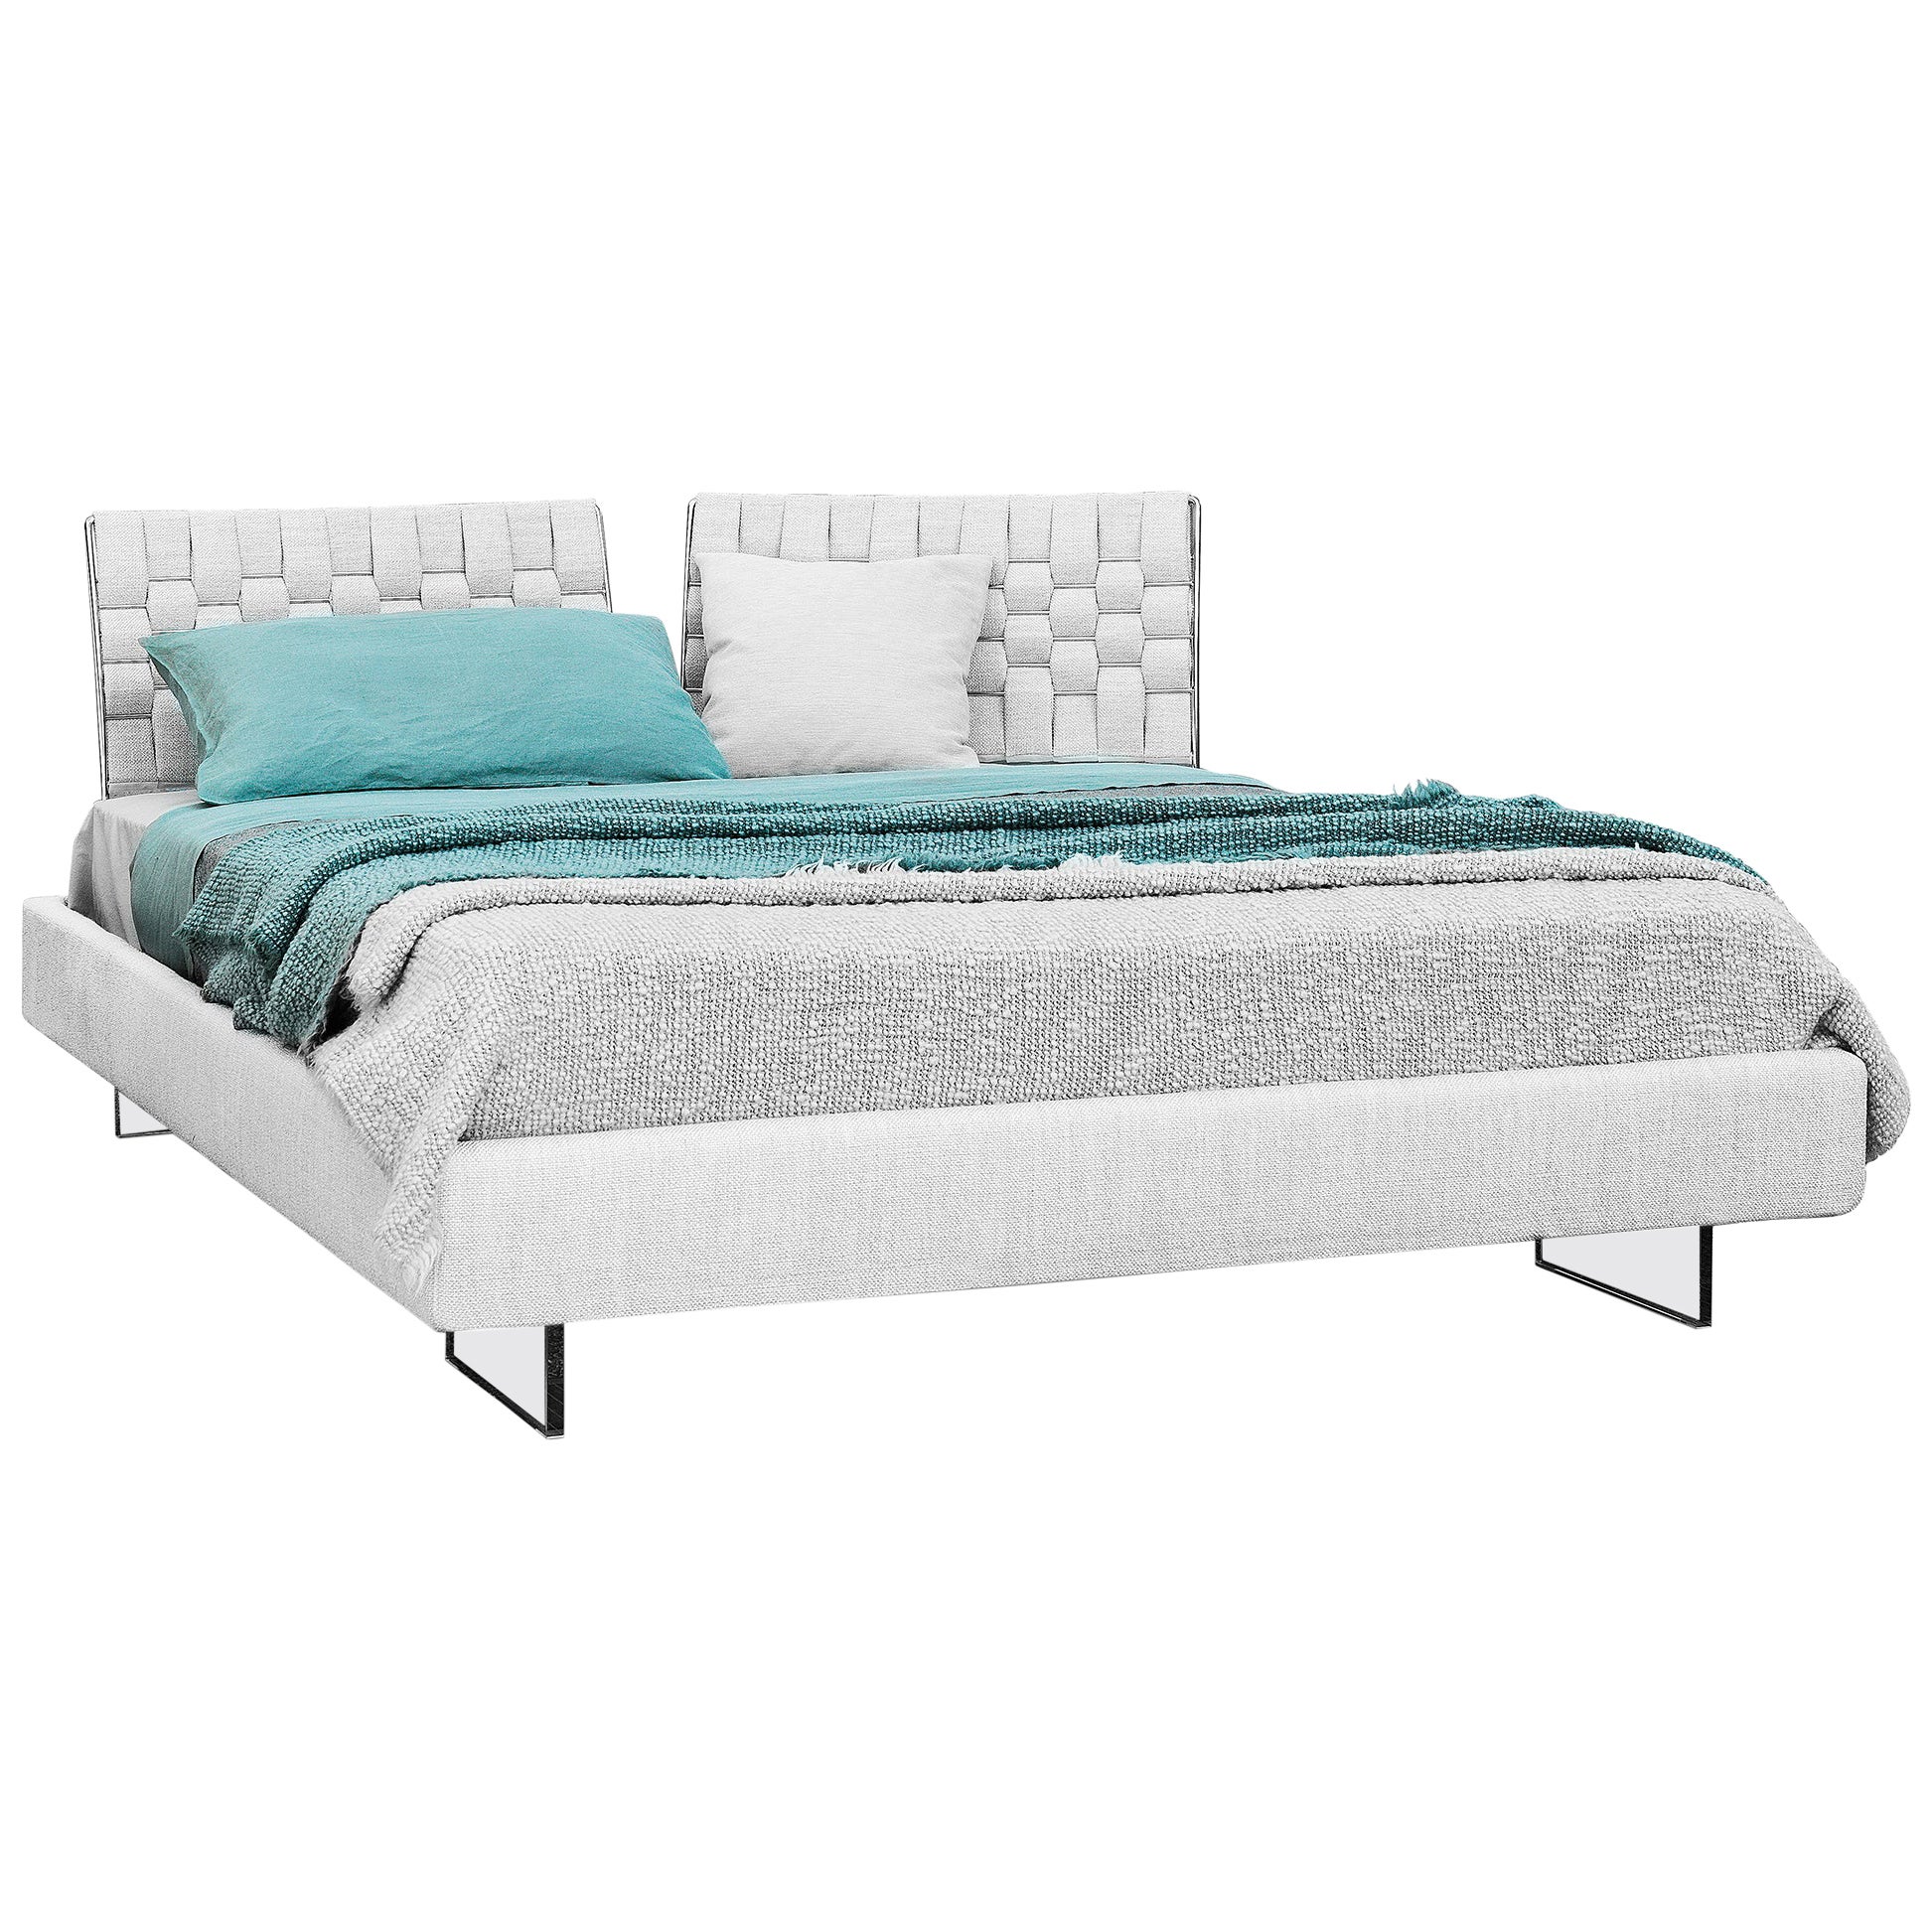 Letto Limes Queen Size Bed in White Avant Après with Padded Bands Headboard For Sale